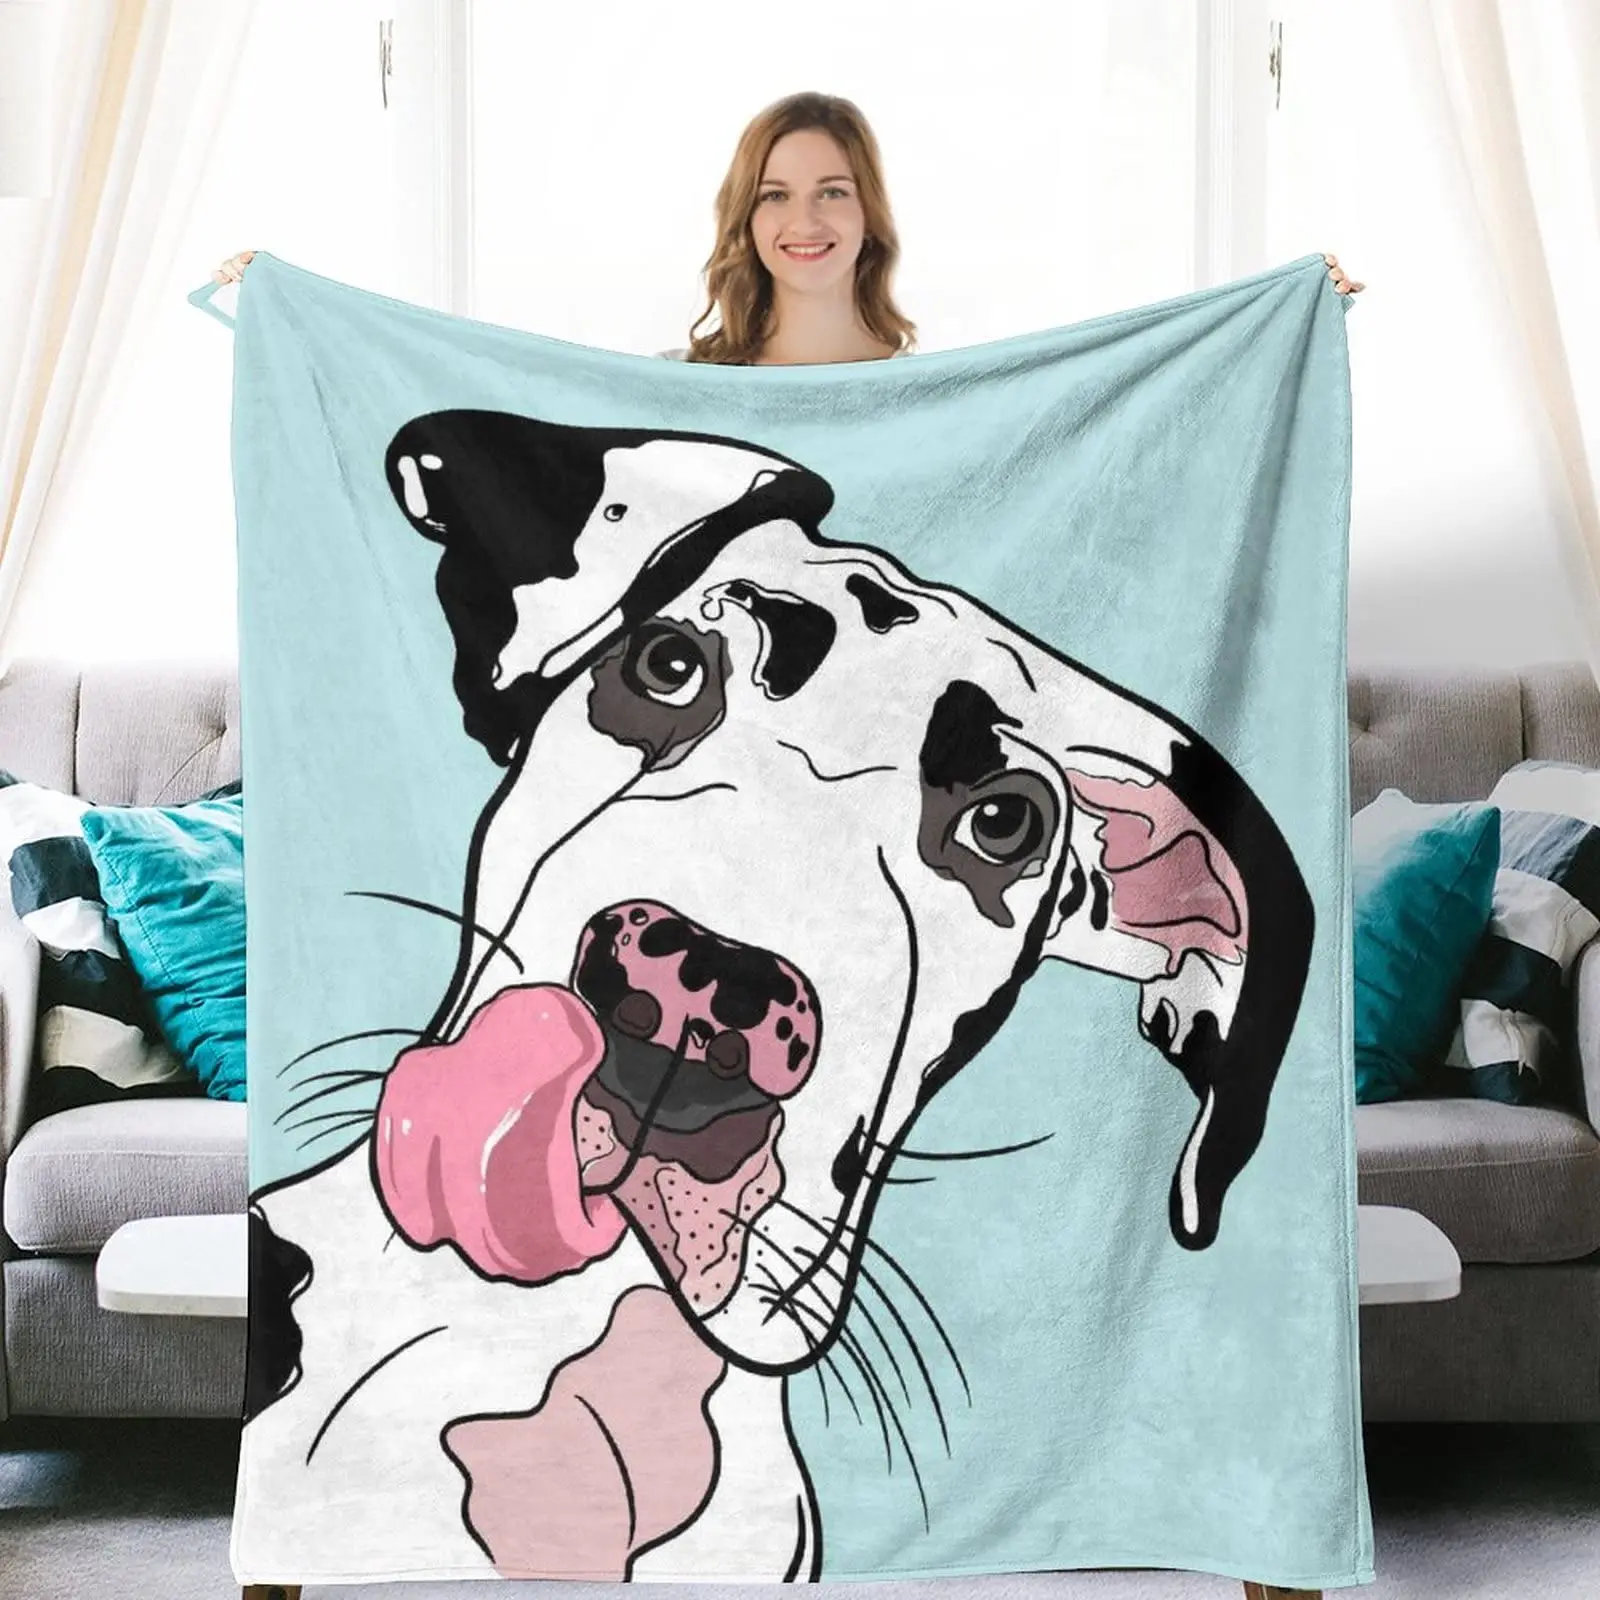 

Dalmatian Dog Flannel Blanket Dog Throw Blanket for Bedroom Couch Travelling, Comfortable All Season Air Conditioning Blankets